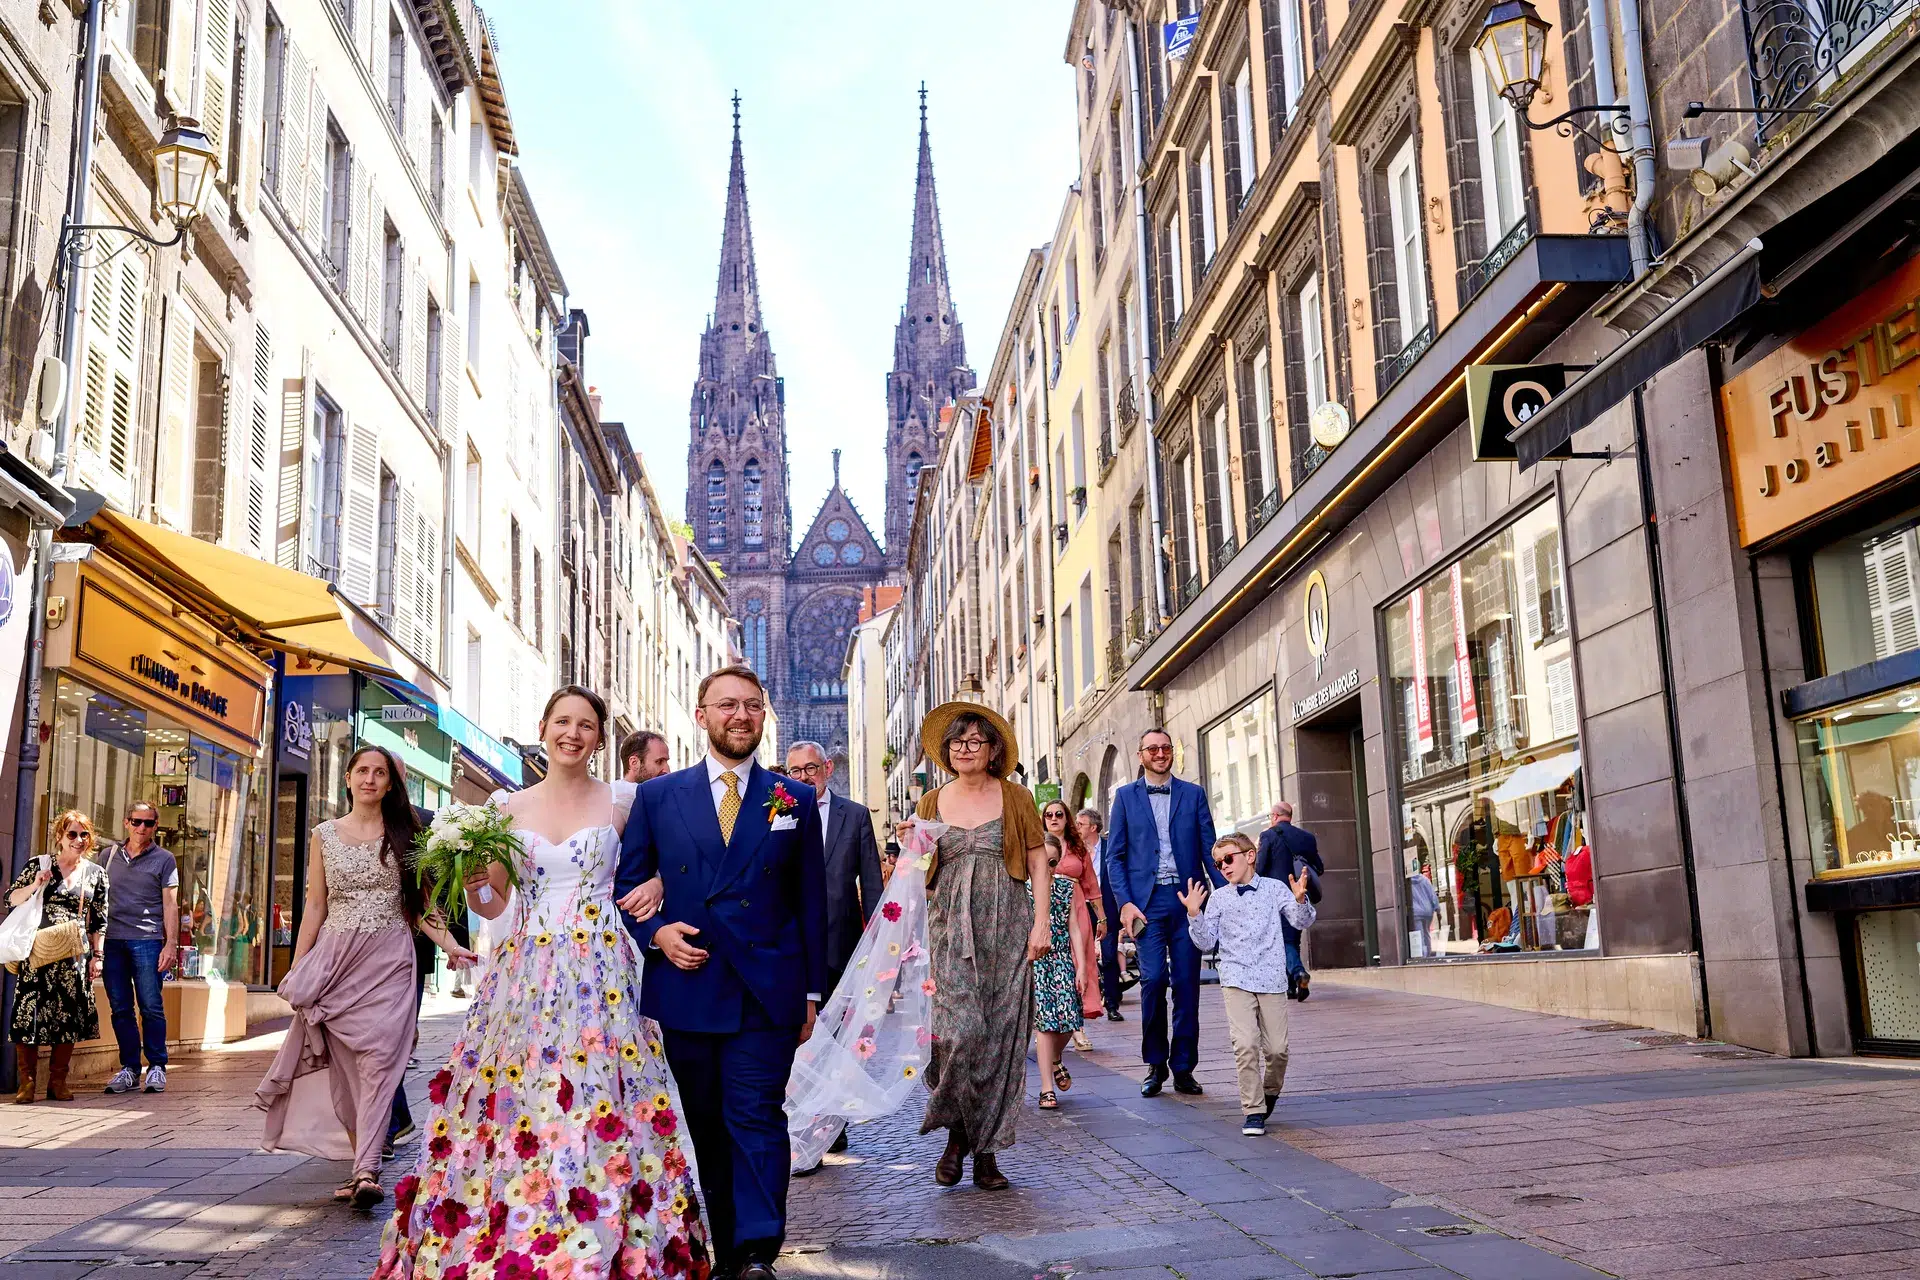 wedding photo-reportage in the streets of Clermont-Ferrand after the ceremony at the town hall